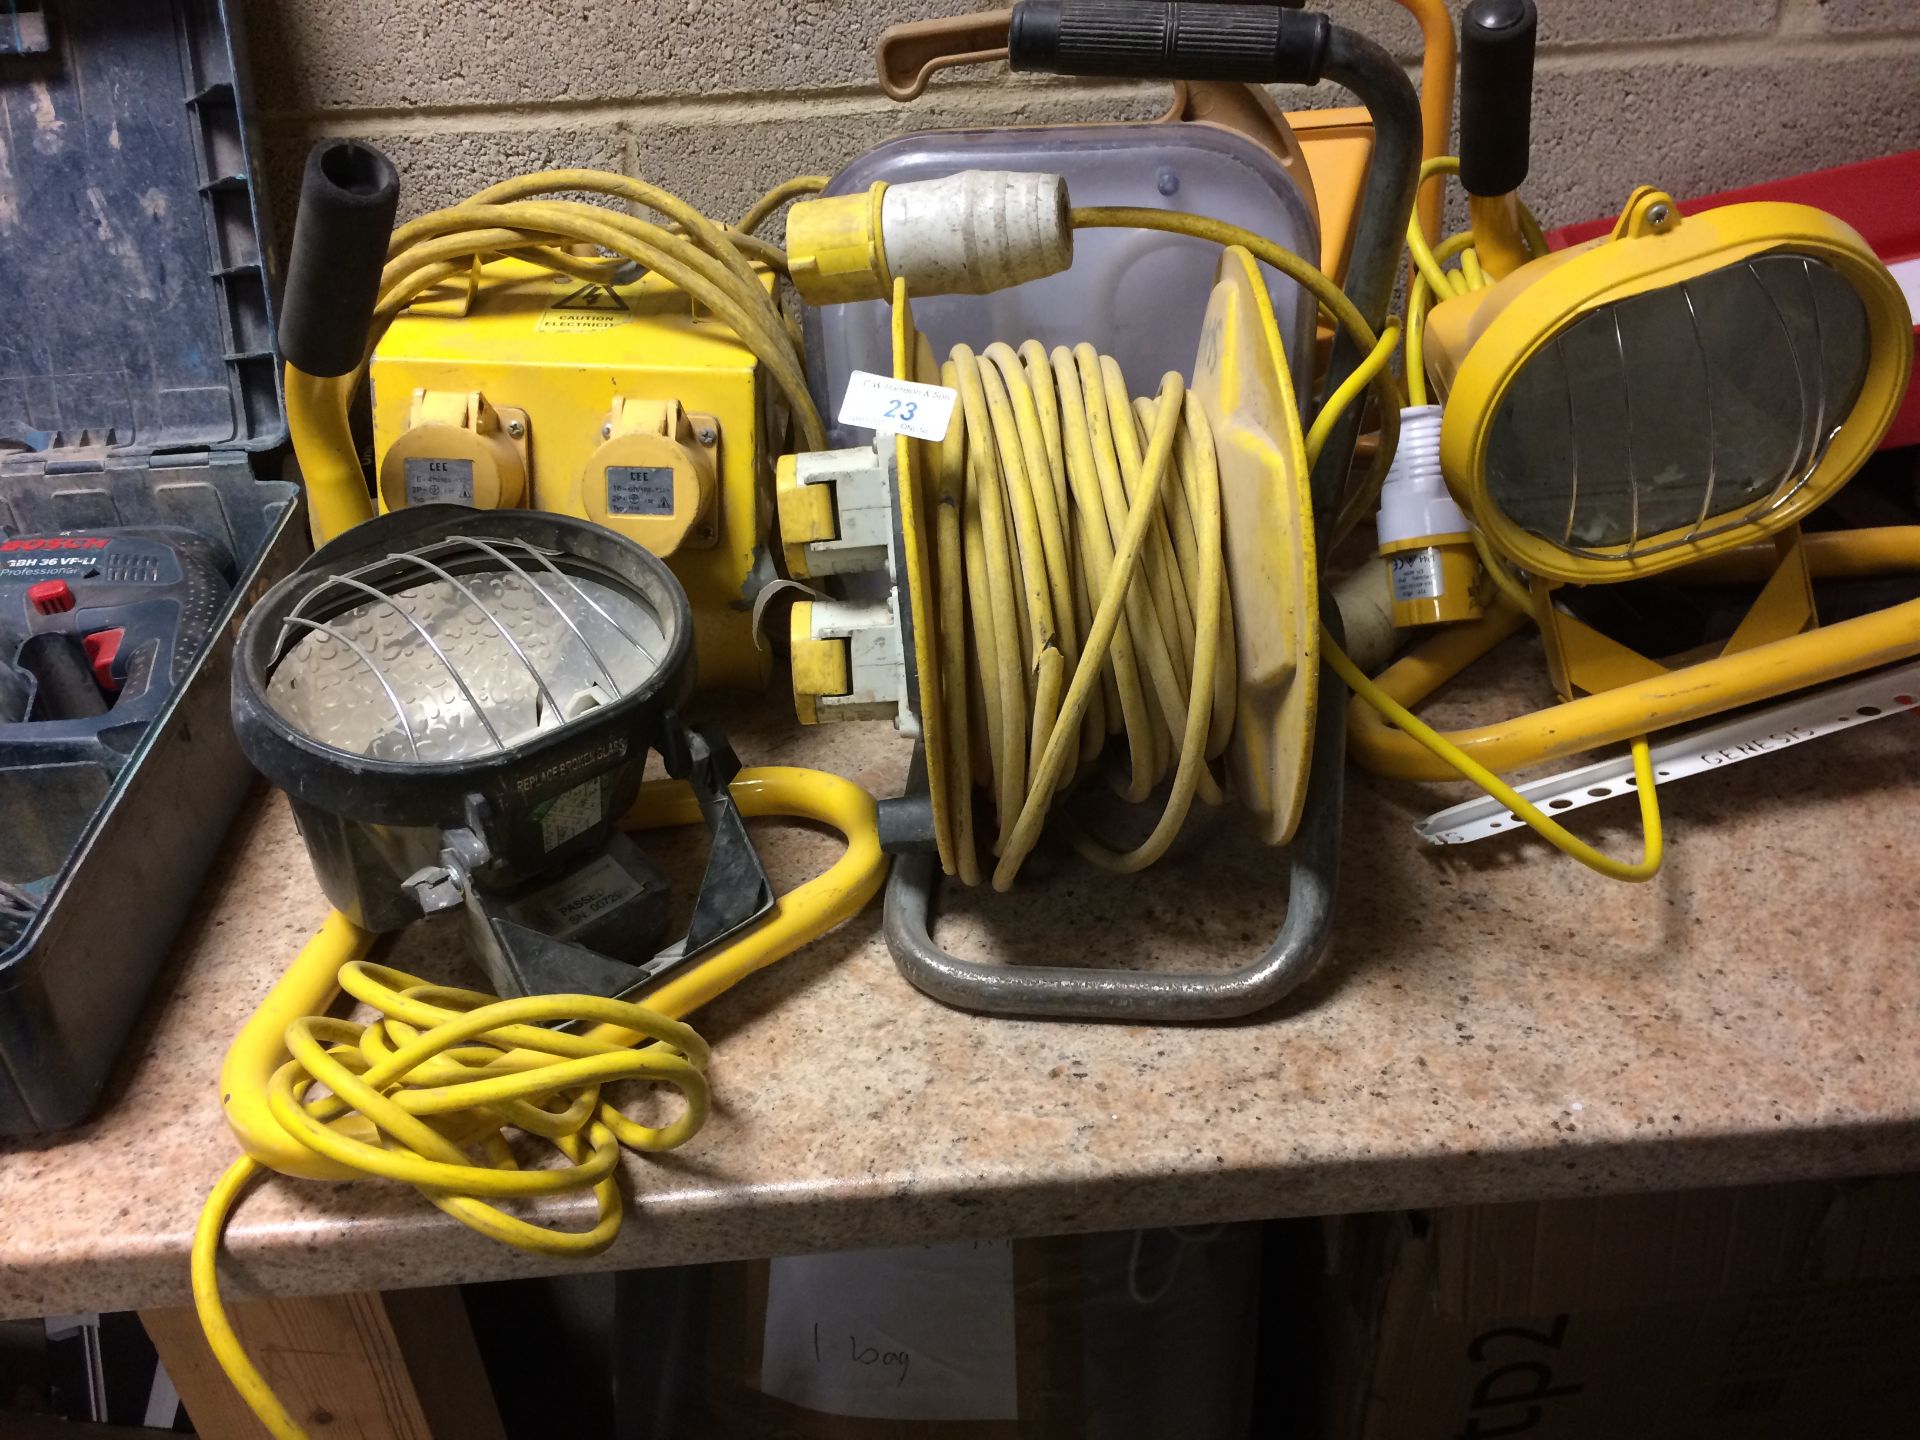 6 items - 2 x 110v extension reels and 4